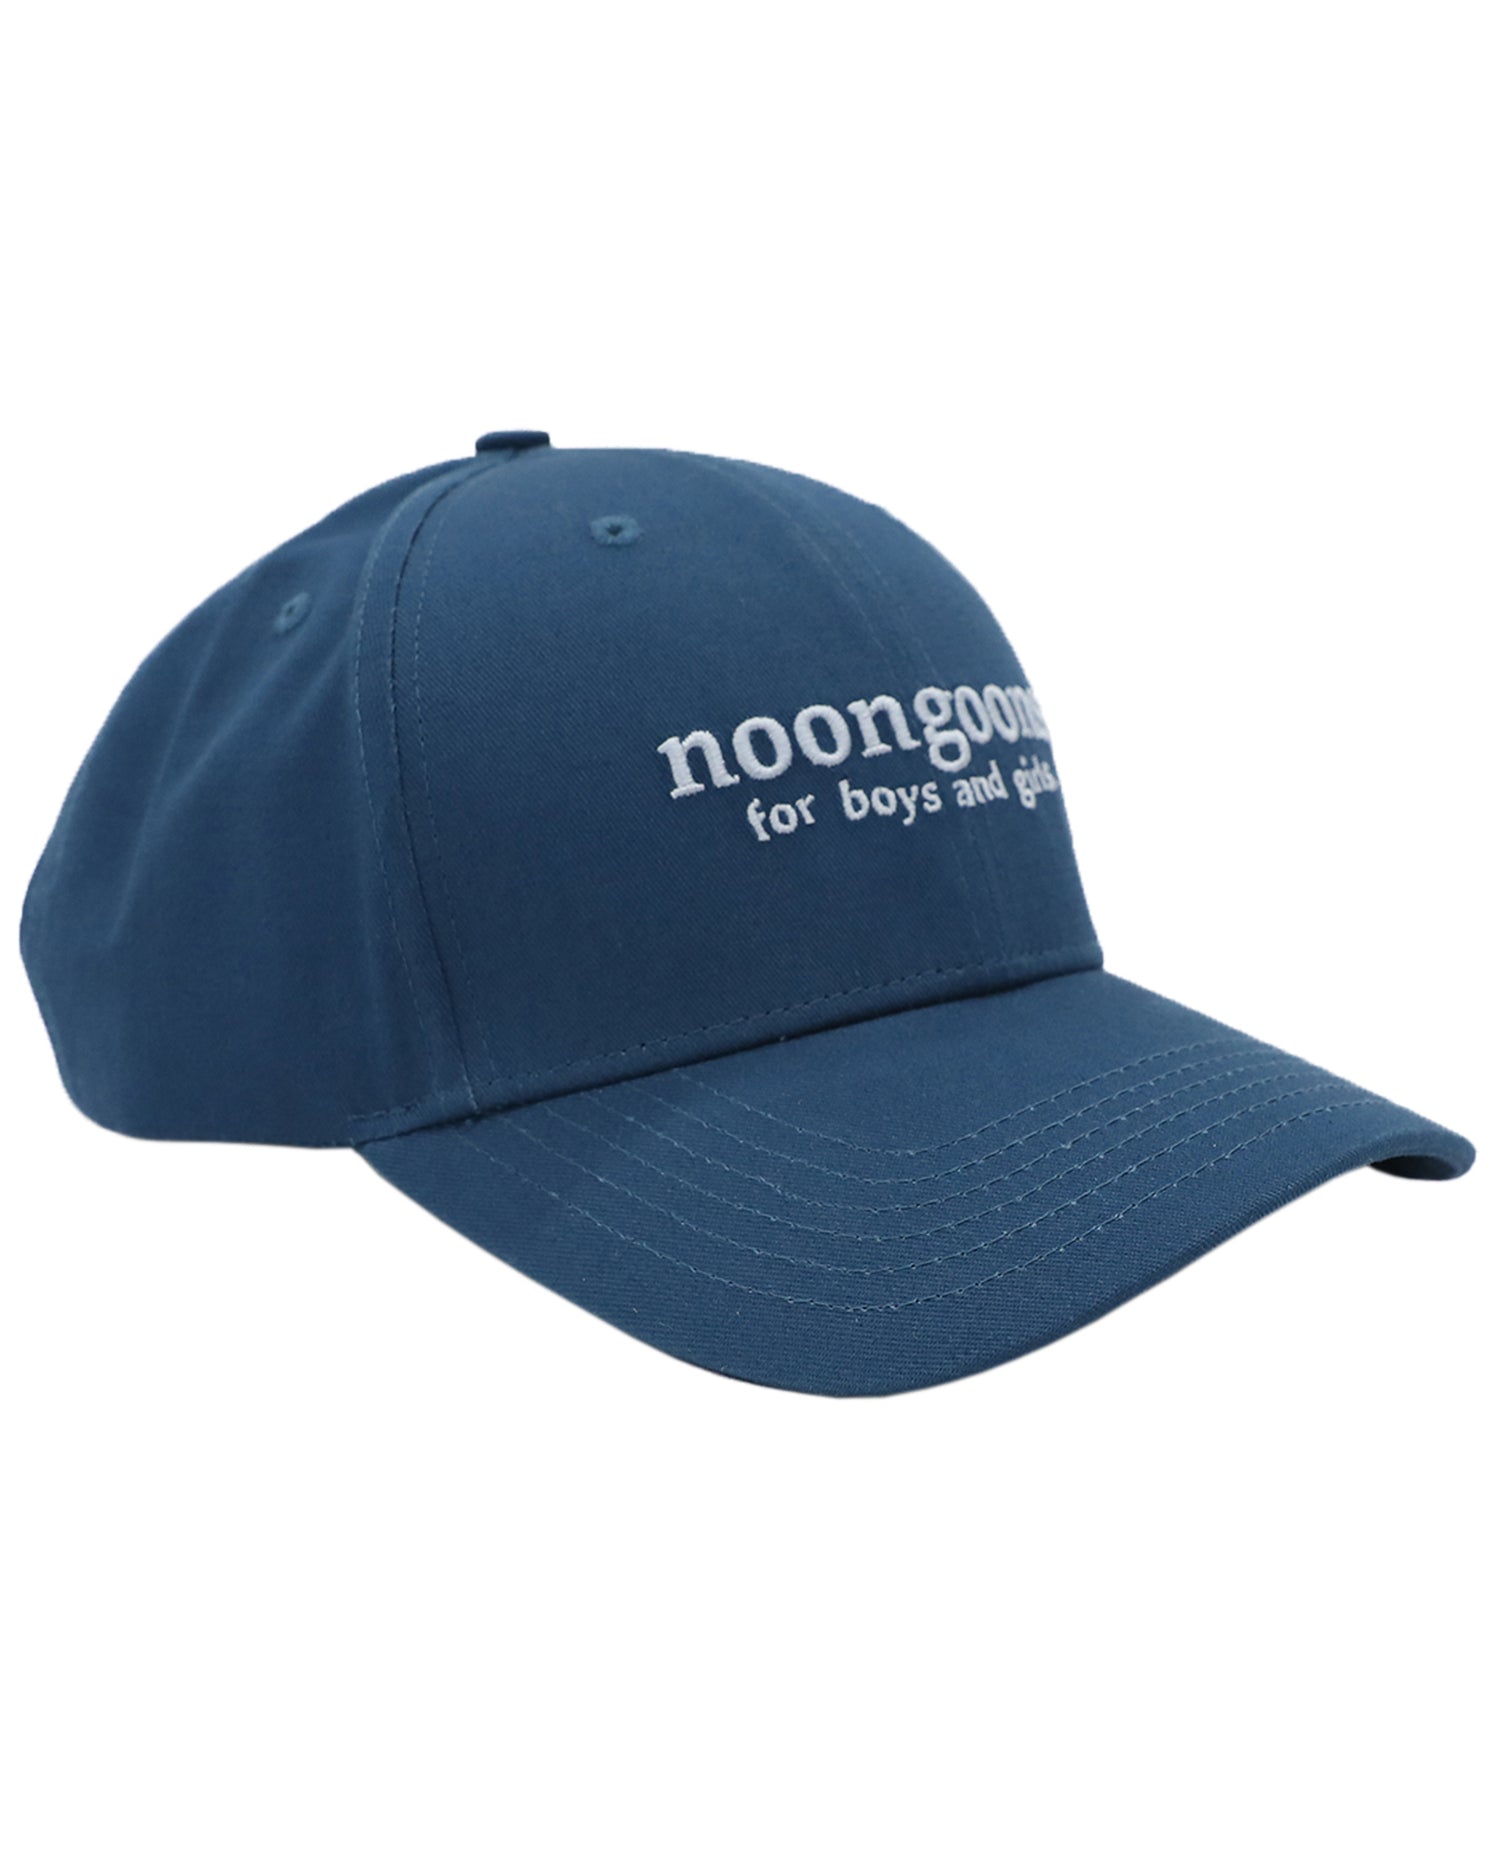 BOYS AND GIRLS HAT - ENGLISH BLUE